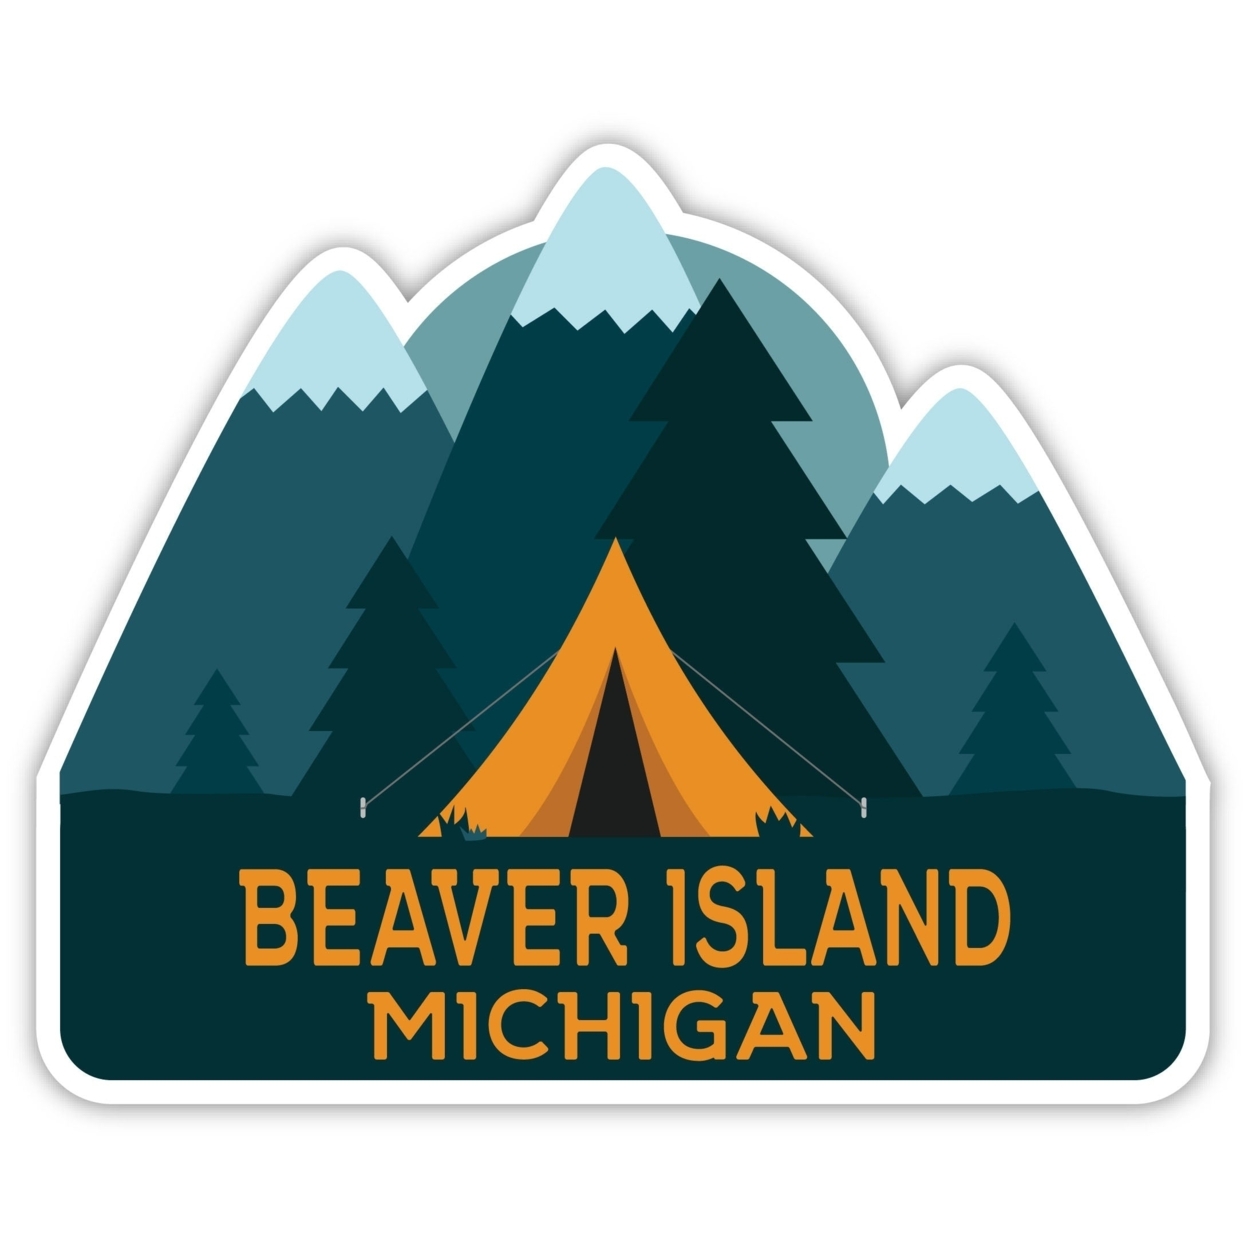 Beaver Island Michigan Souvenir Decorative Stickers (Choose Theme And Size) - 4-Pack, 4-Inch, Tent